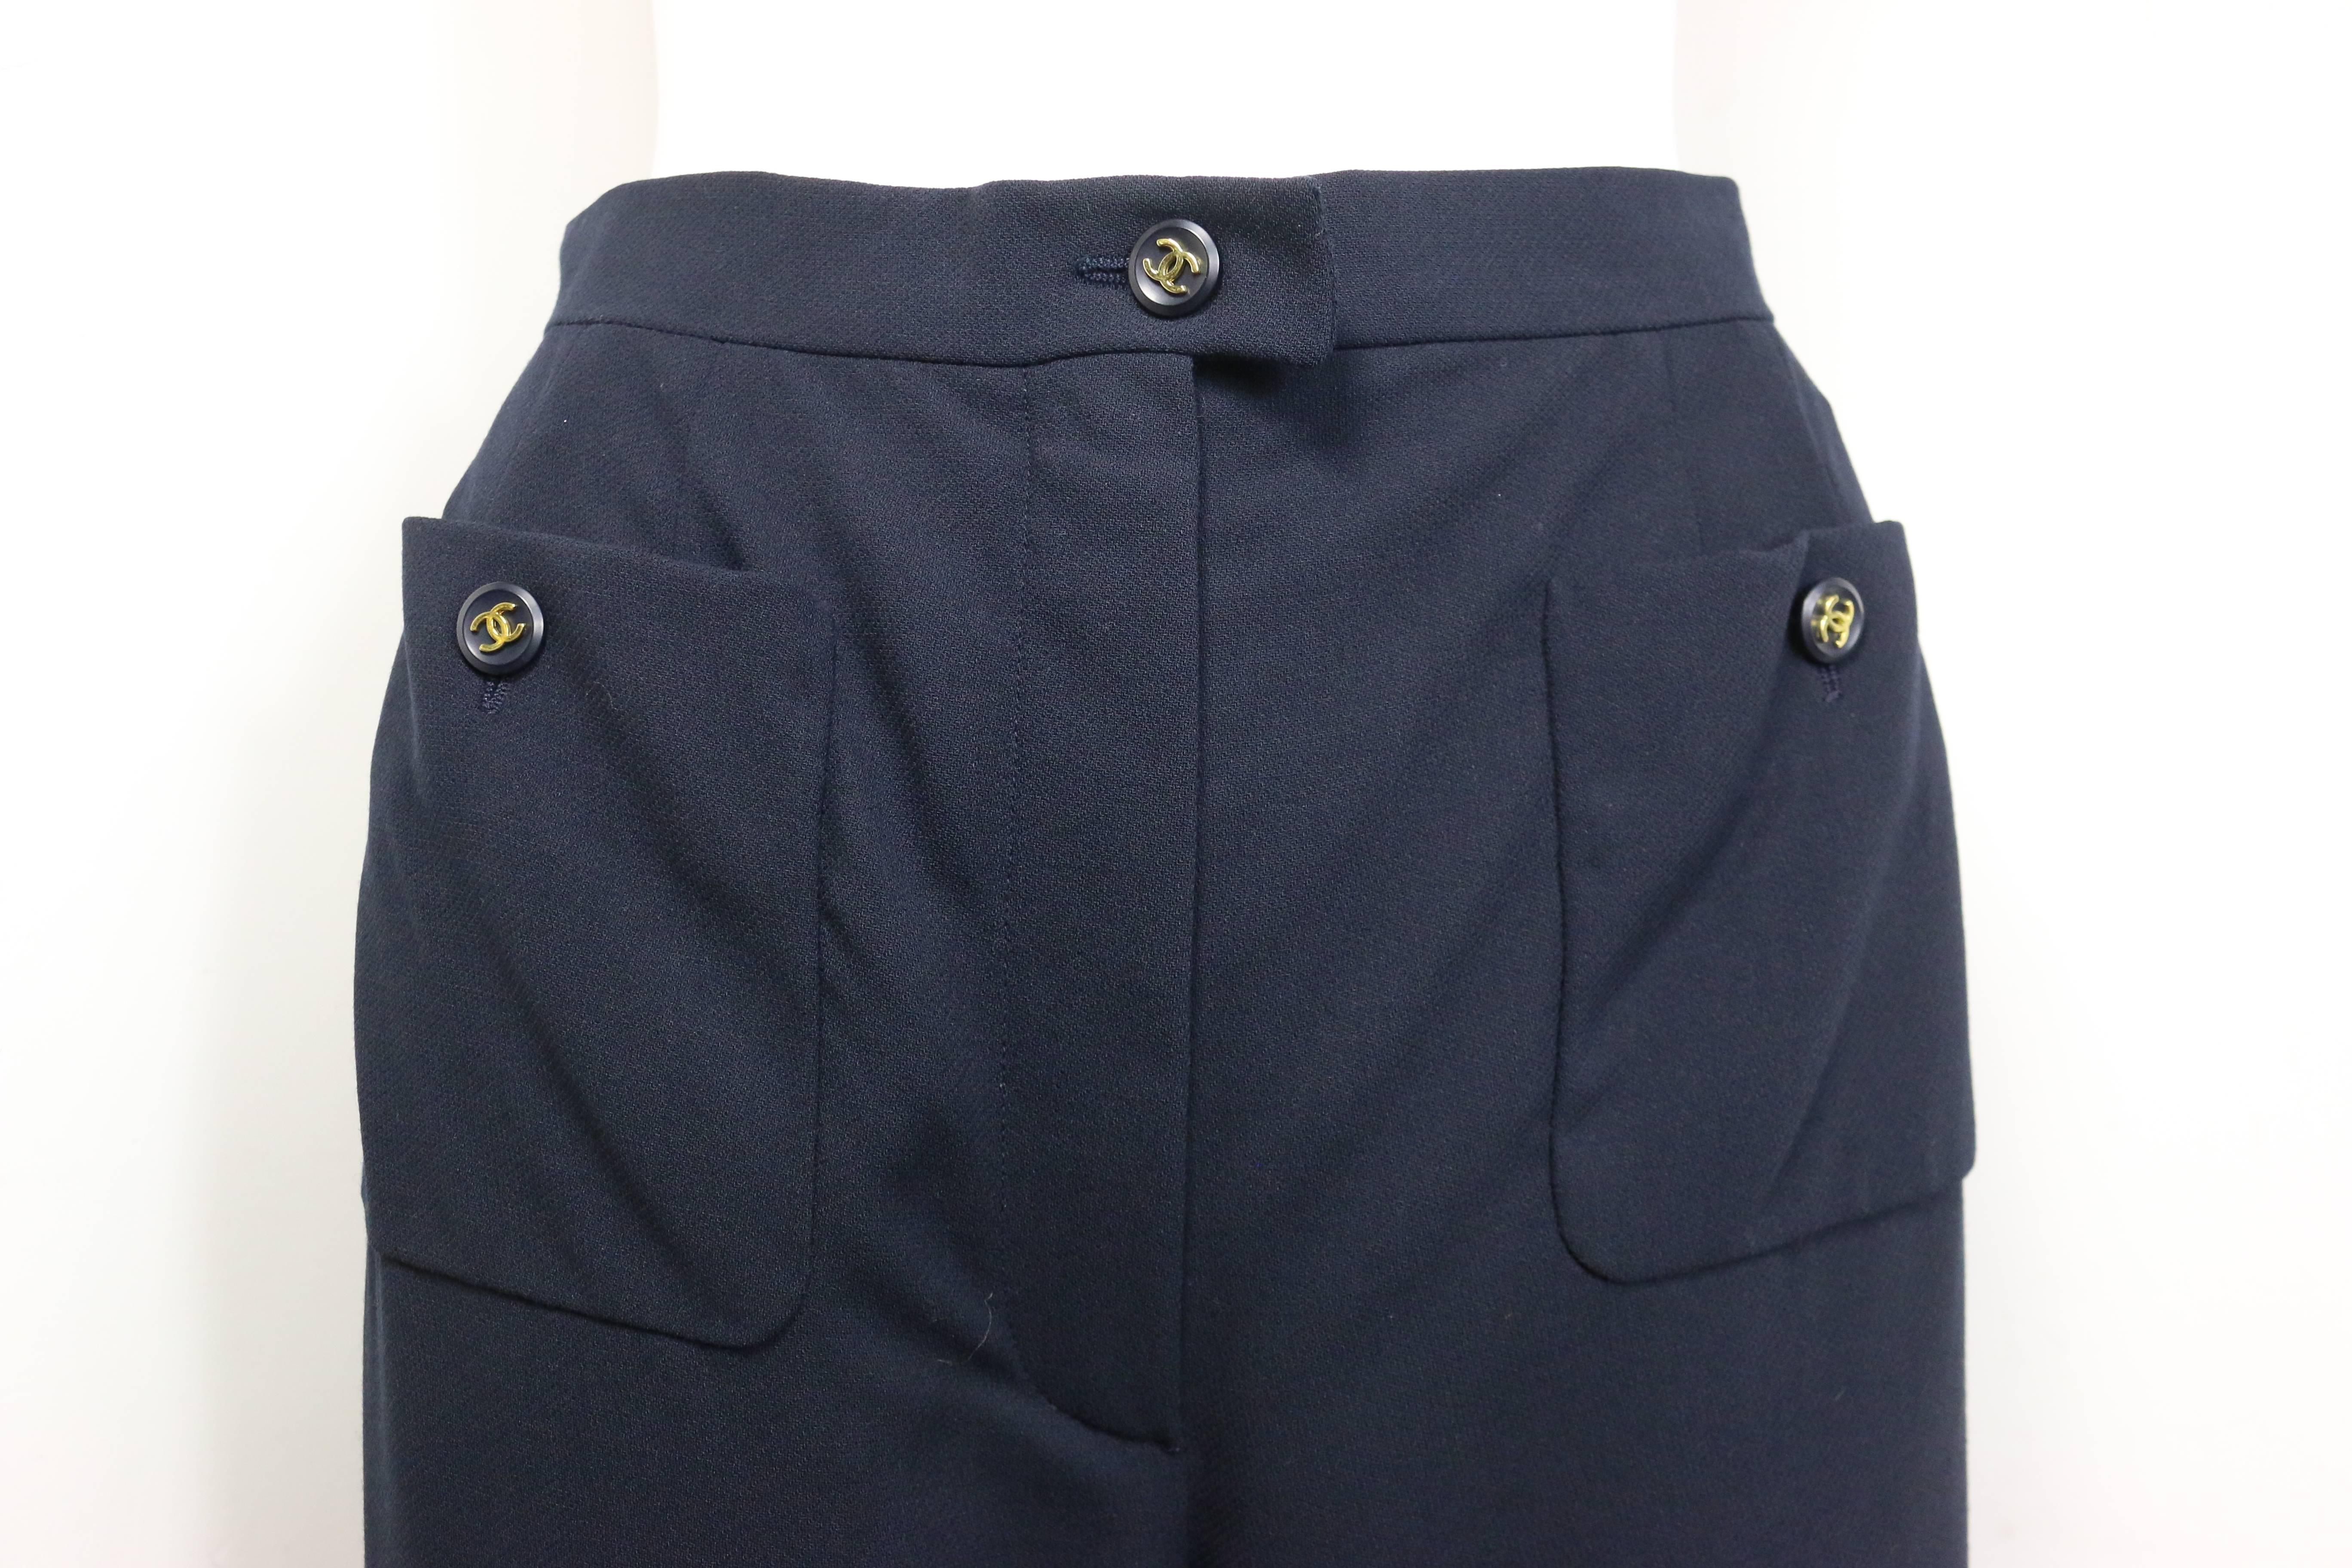 - Chanel navy wool wild legs pants from 1995 cruise collection. Featuring two gold 